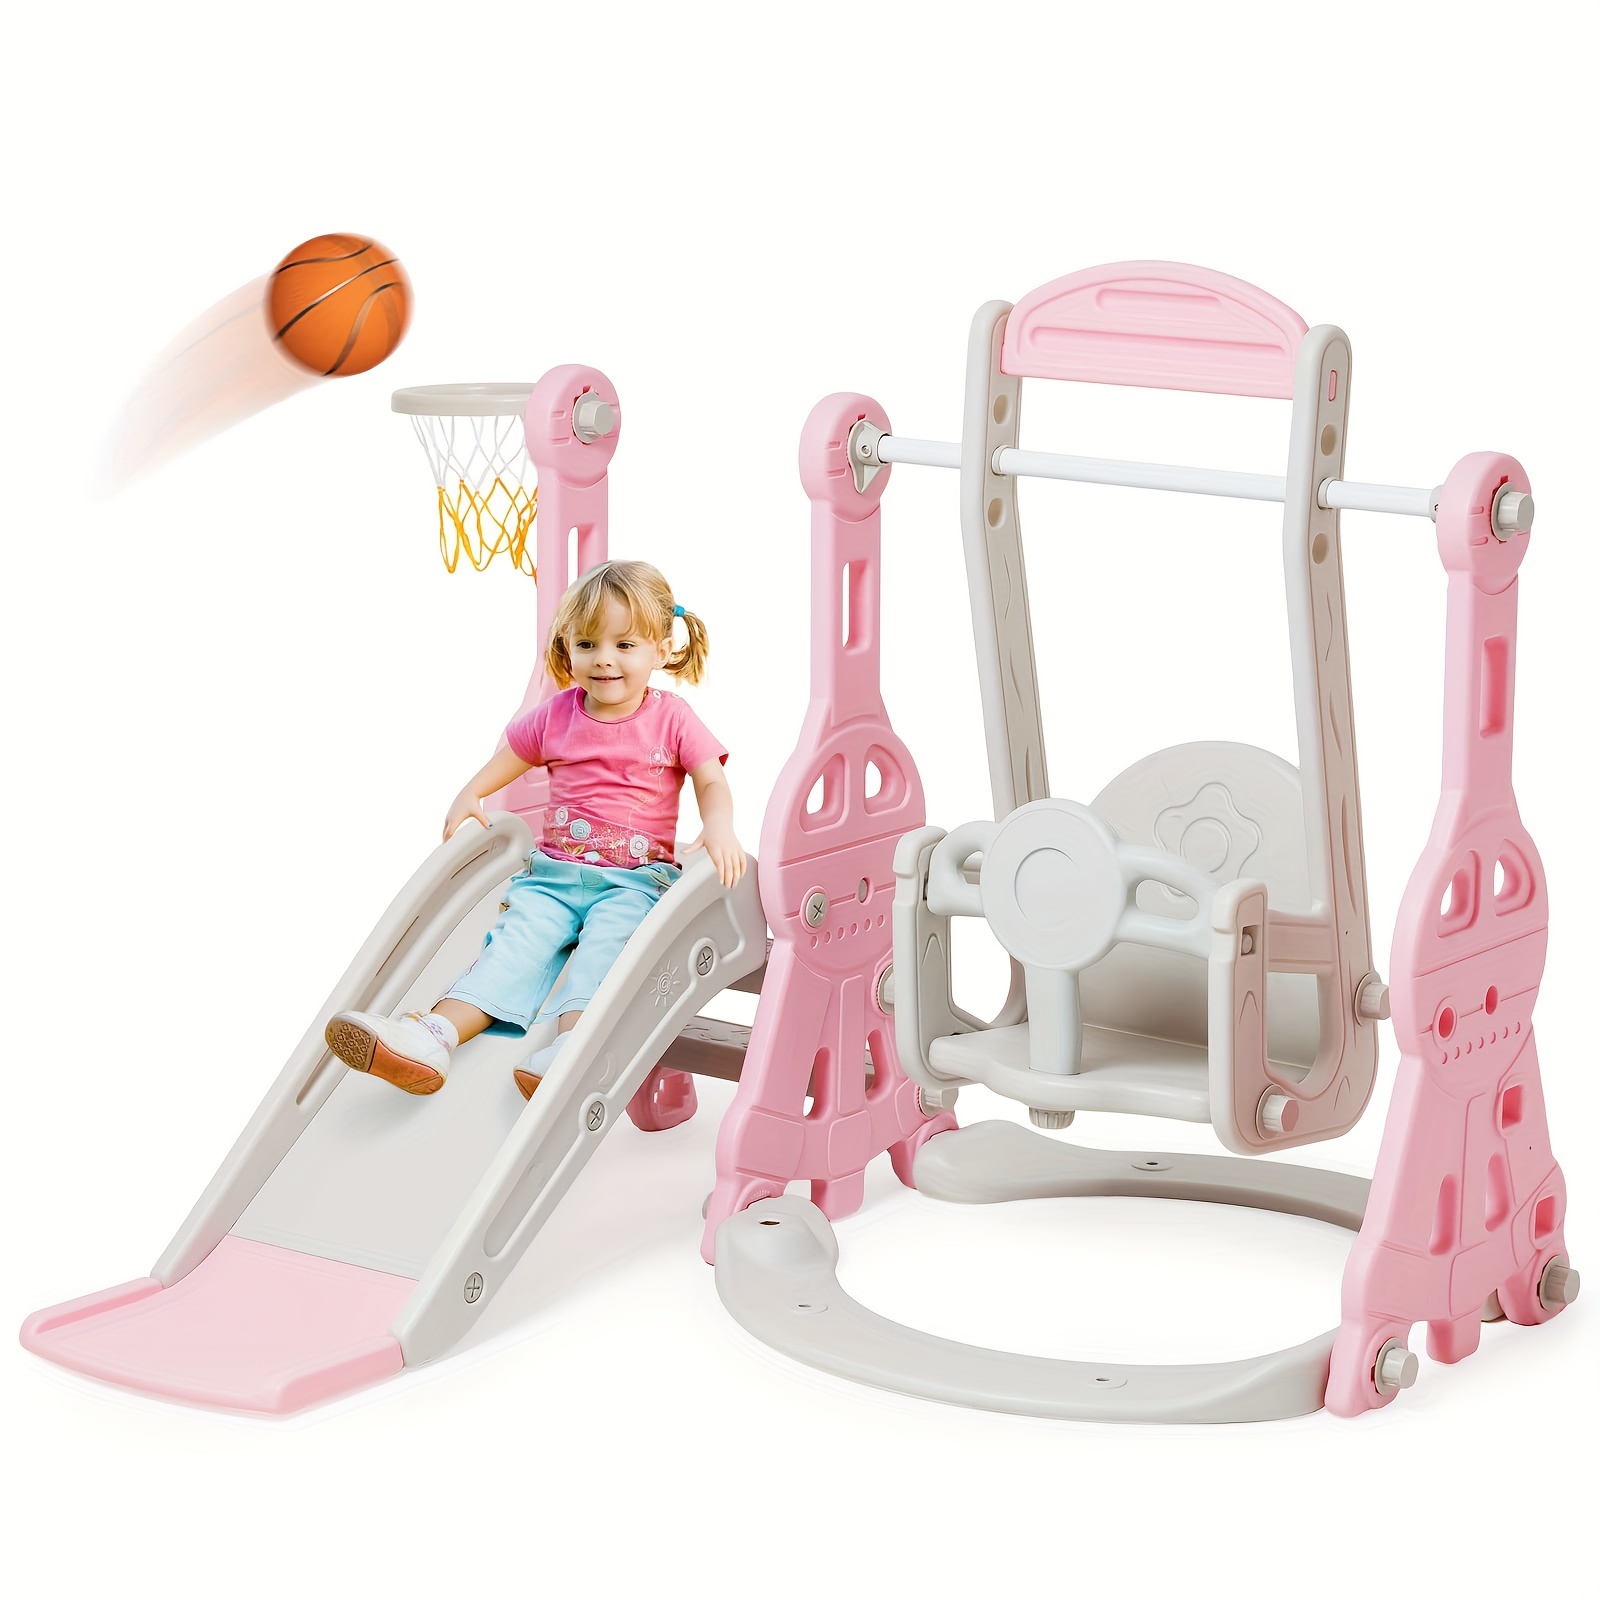 

Slide And Swing Set 4 In 1 Climber Playset With Swing Slide Climber And Basketball Slide And Swing Set Indoor Outdoor Backyard Playground Toy (pink)